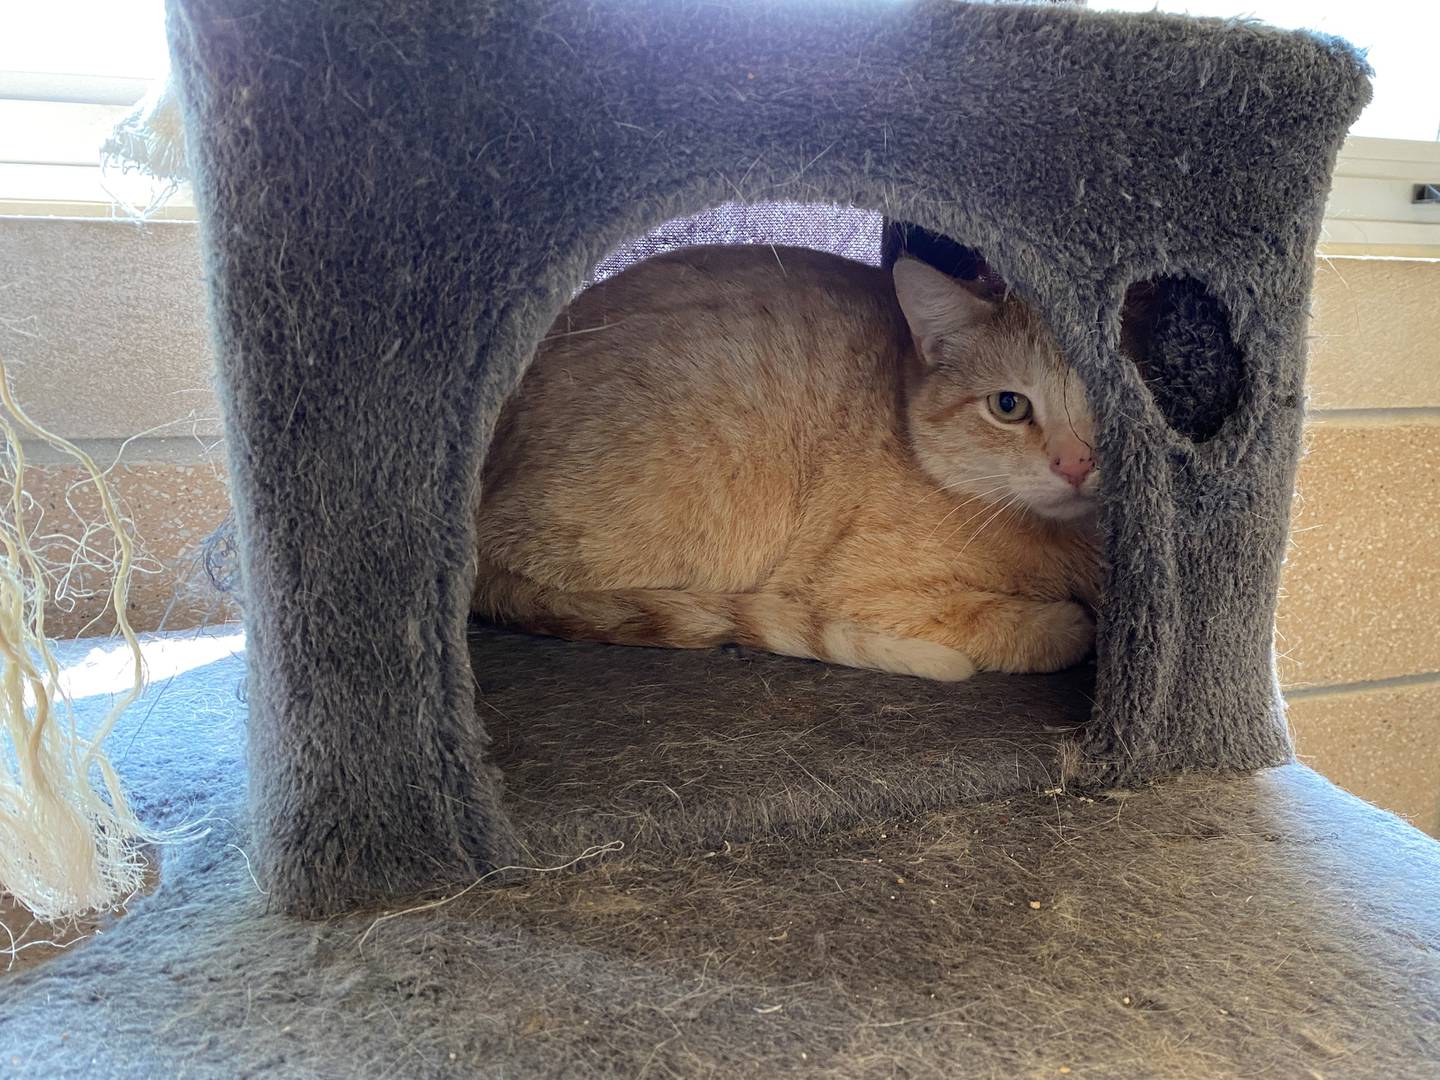 Jasper is a super friendly cat at two-years-old, but really loves his relaxation time and sleep. He will come out to play for the right amount of attention.